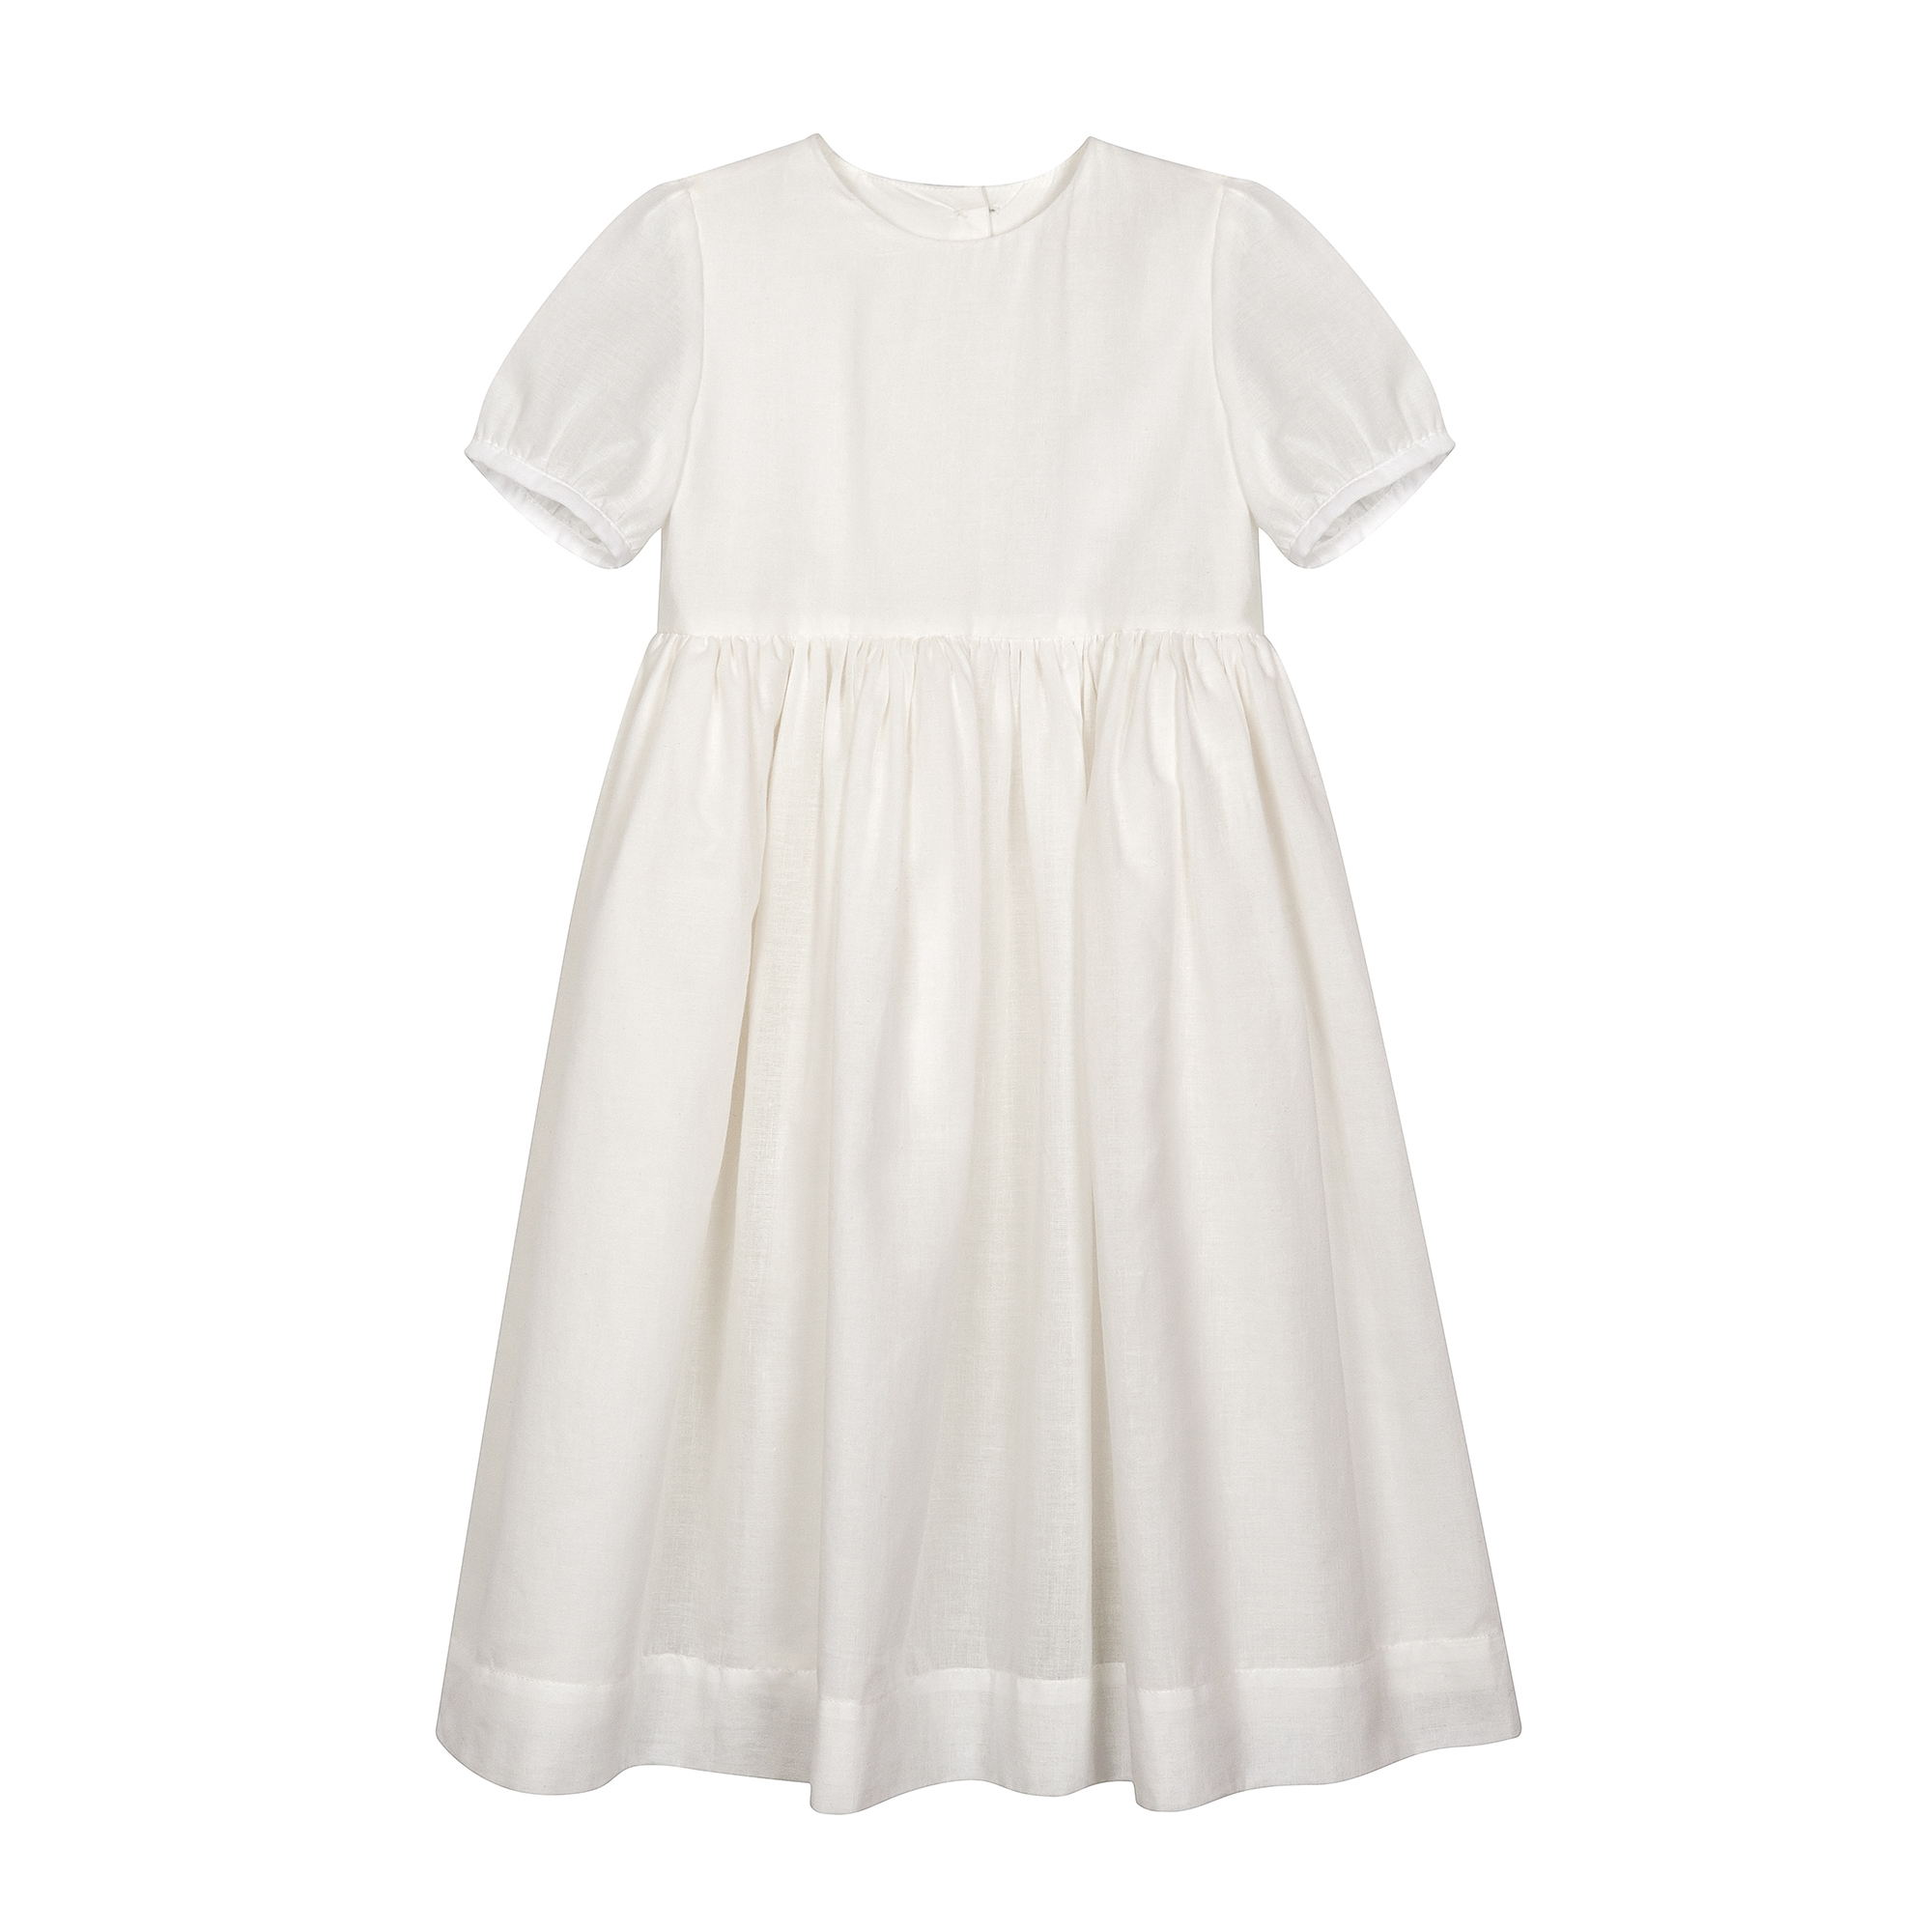 Cotton Flower Girl Dress with Short Sleeves - The Little Wedding Company